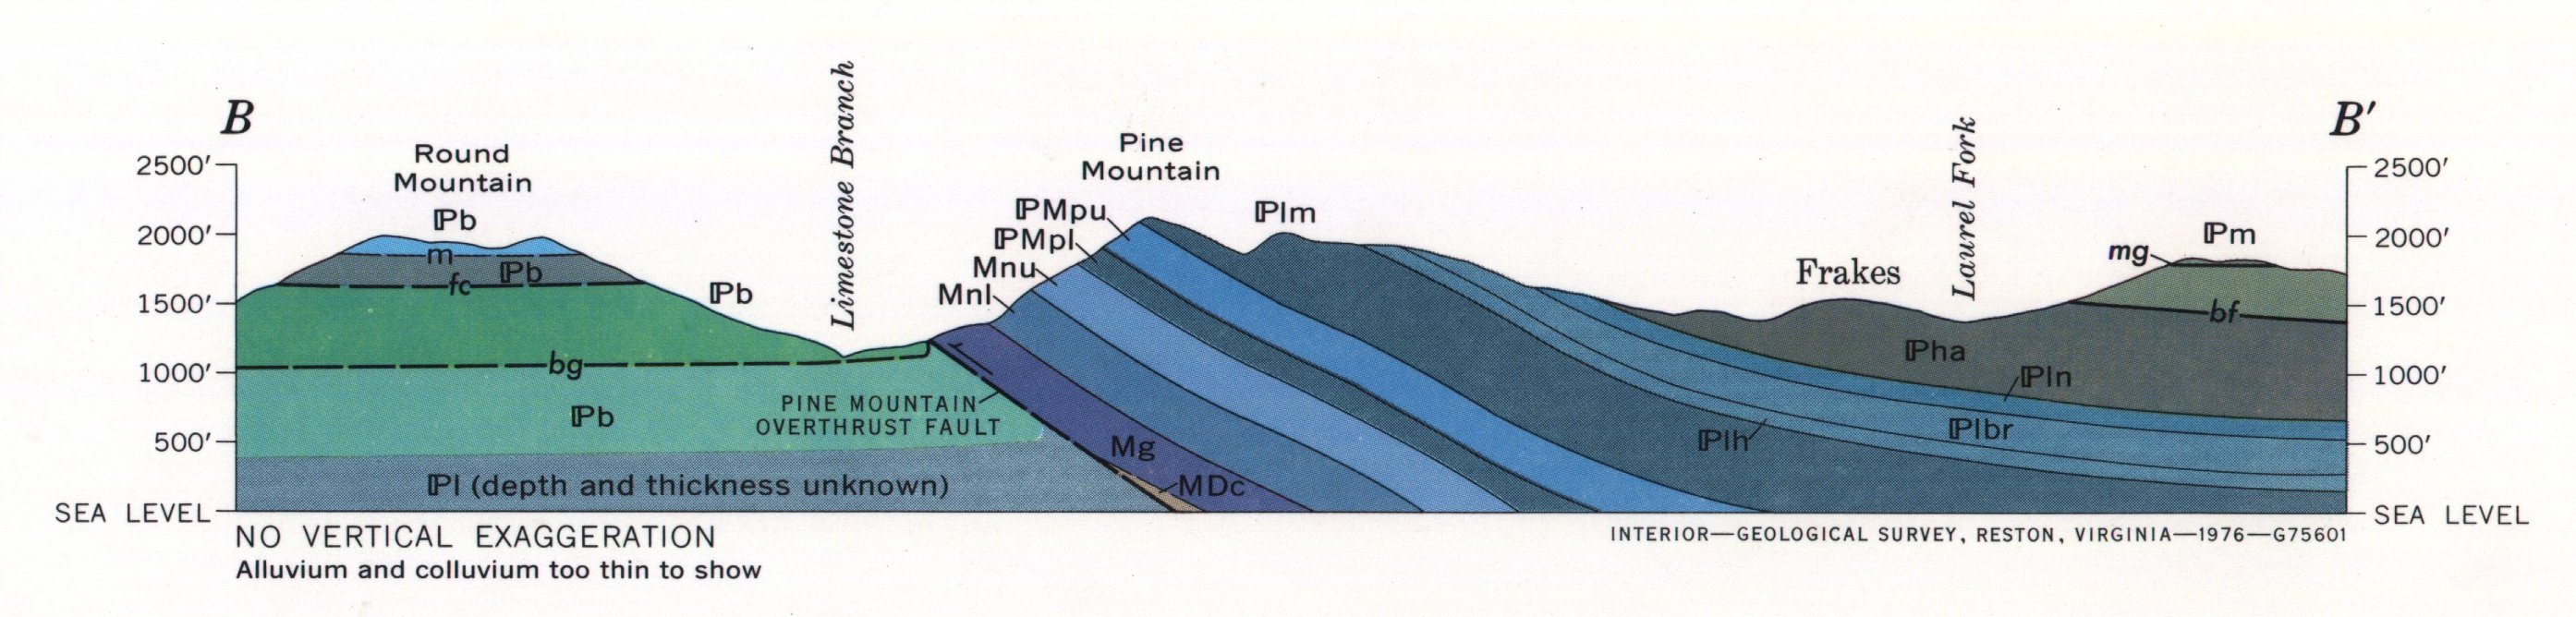 view of the rocks beneath Pine Mountain from the Frakes Geological Quadrangle Map 